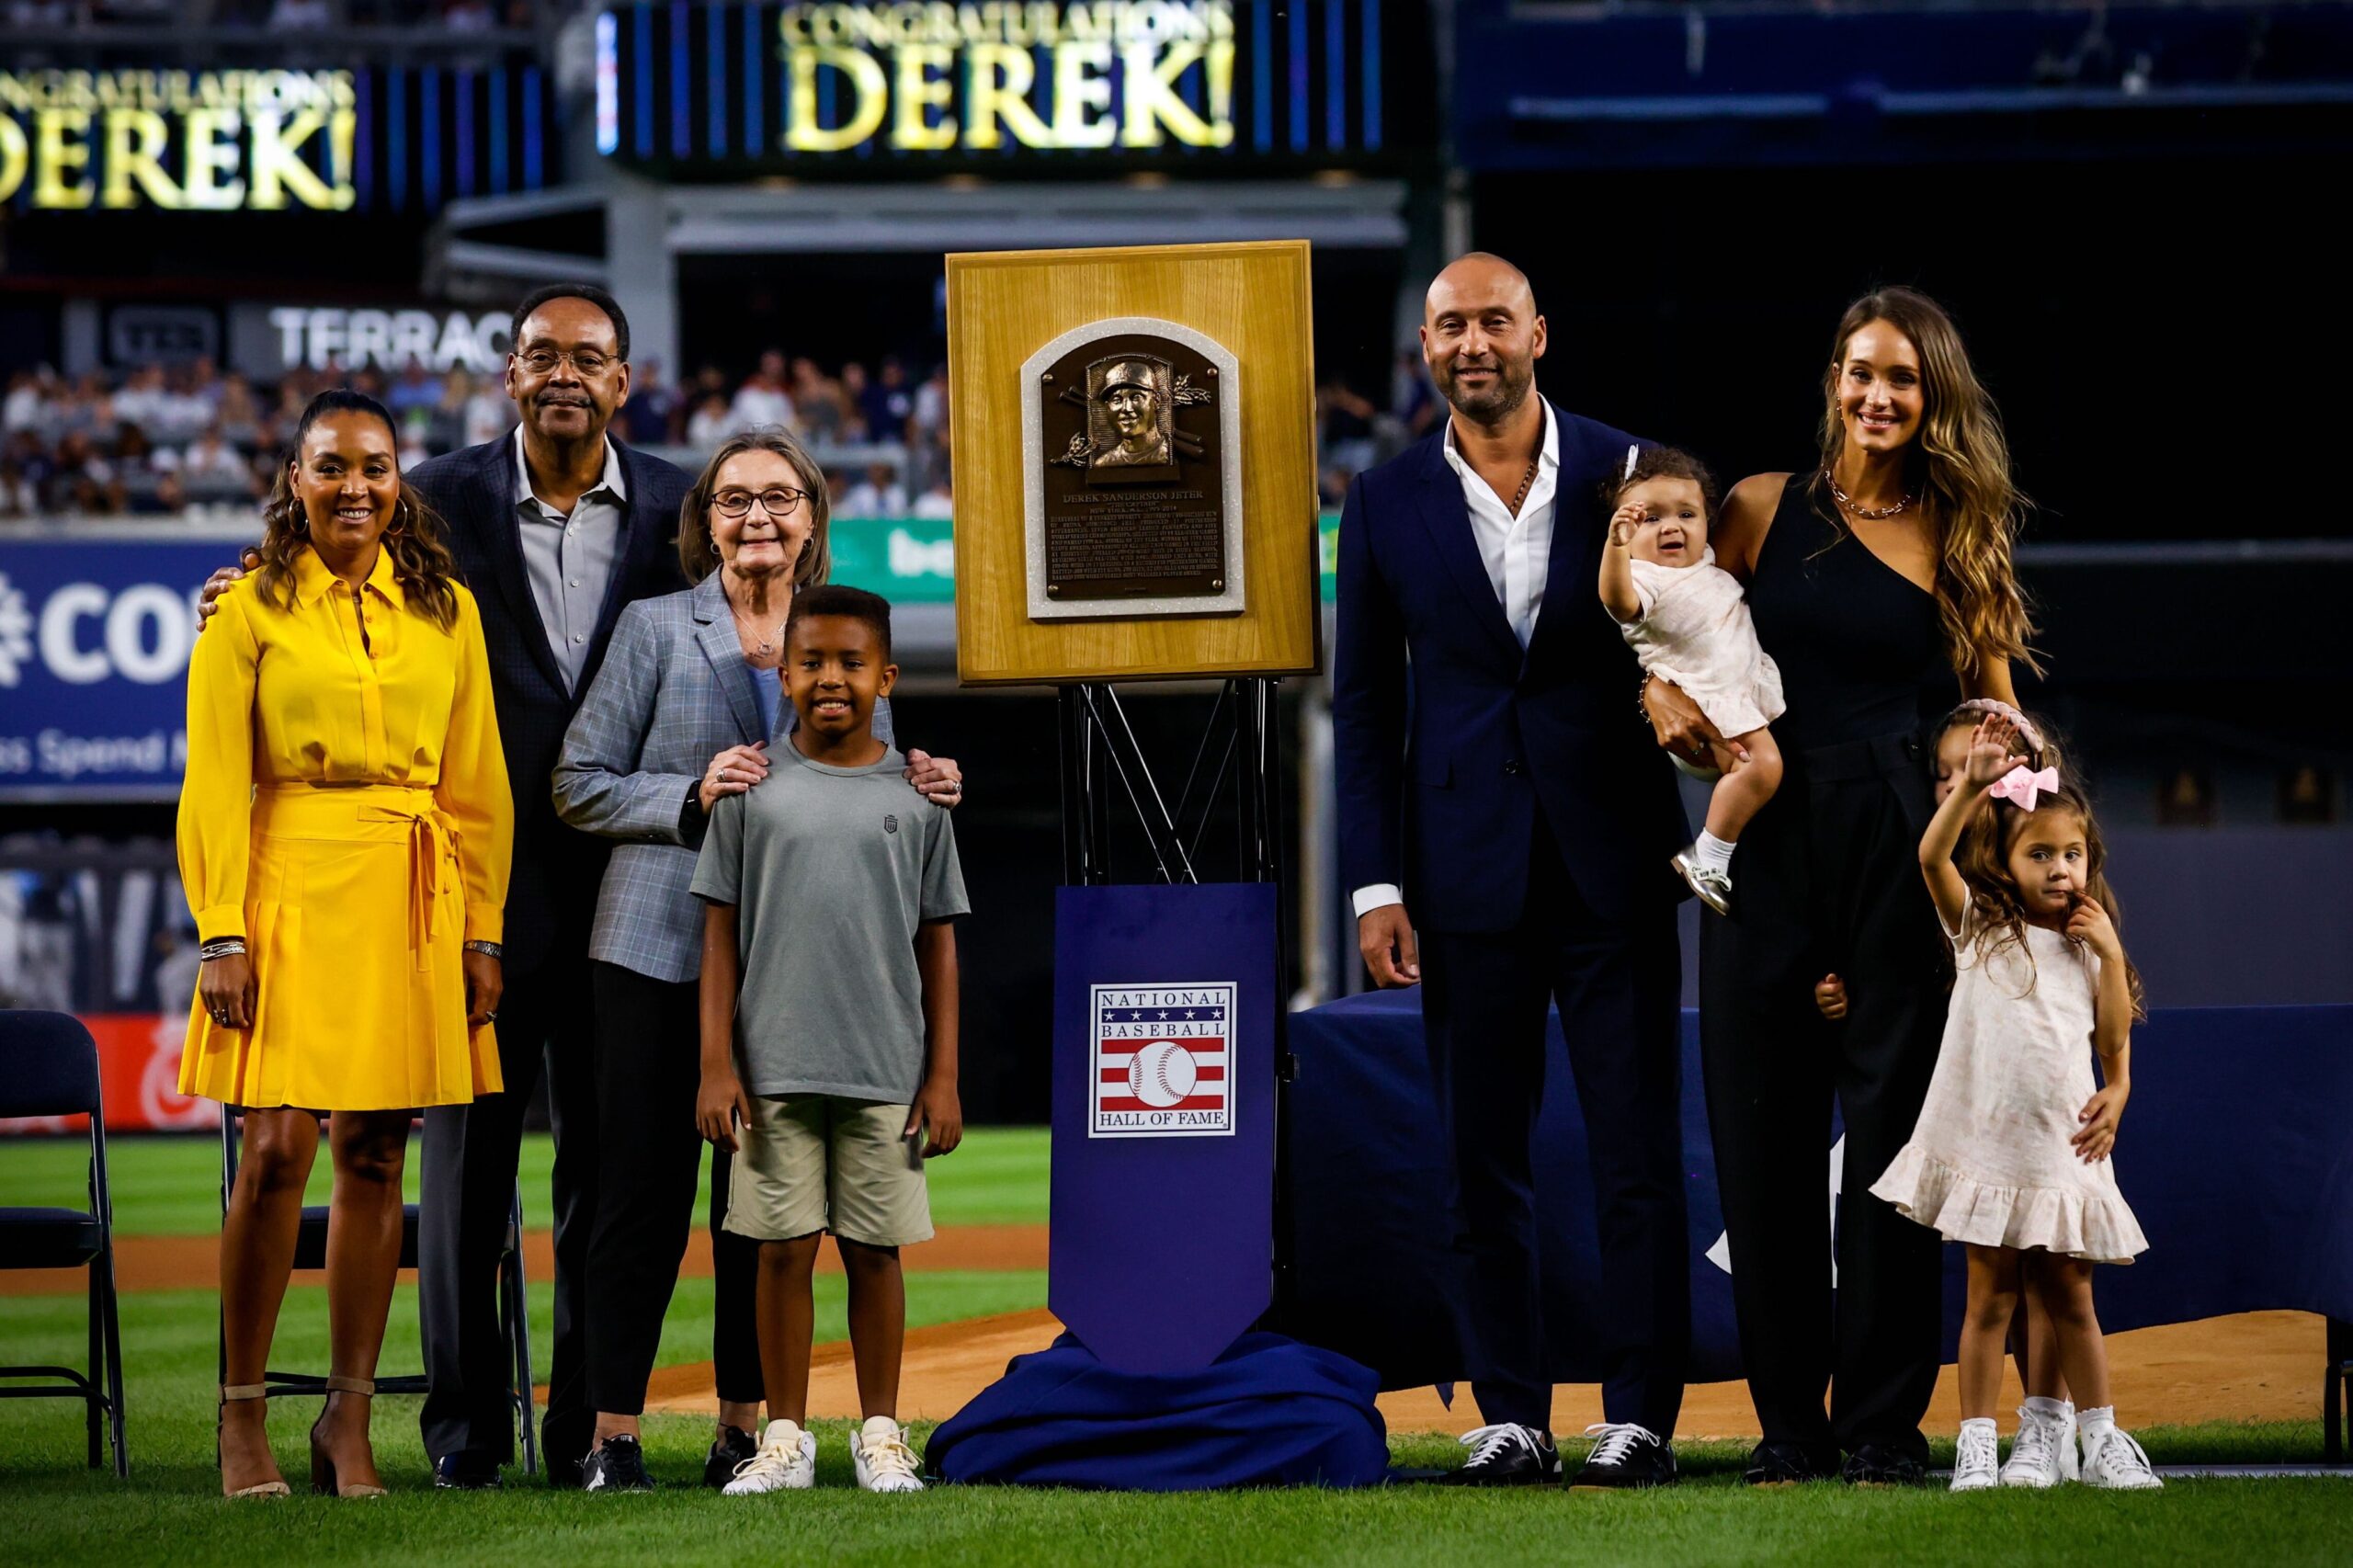 Derek Jeter's HOF celebration will be a special homecoming